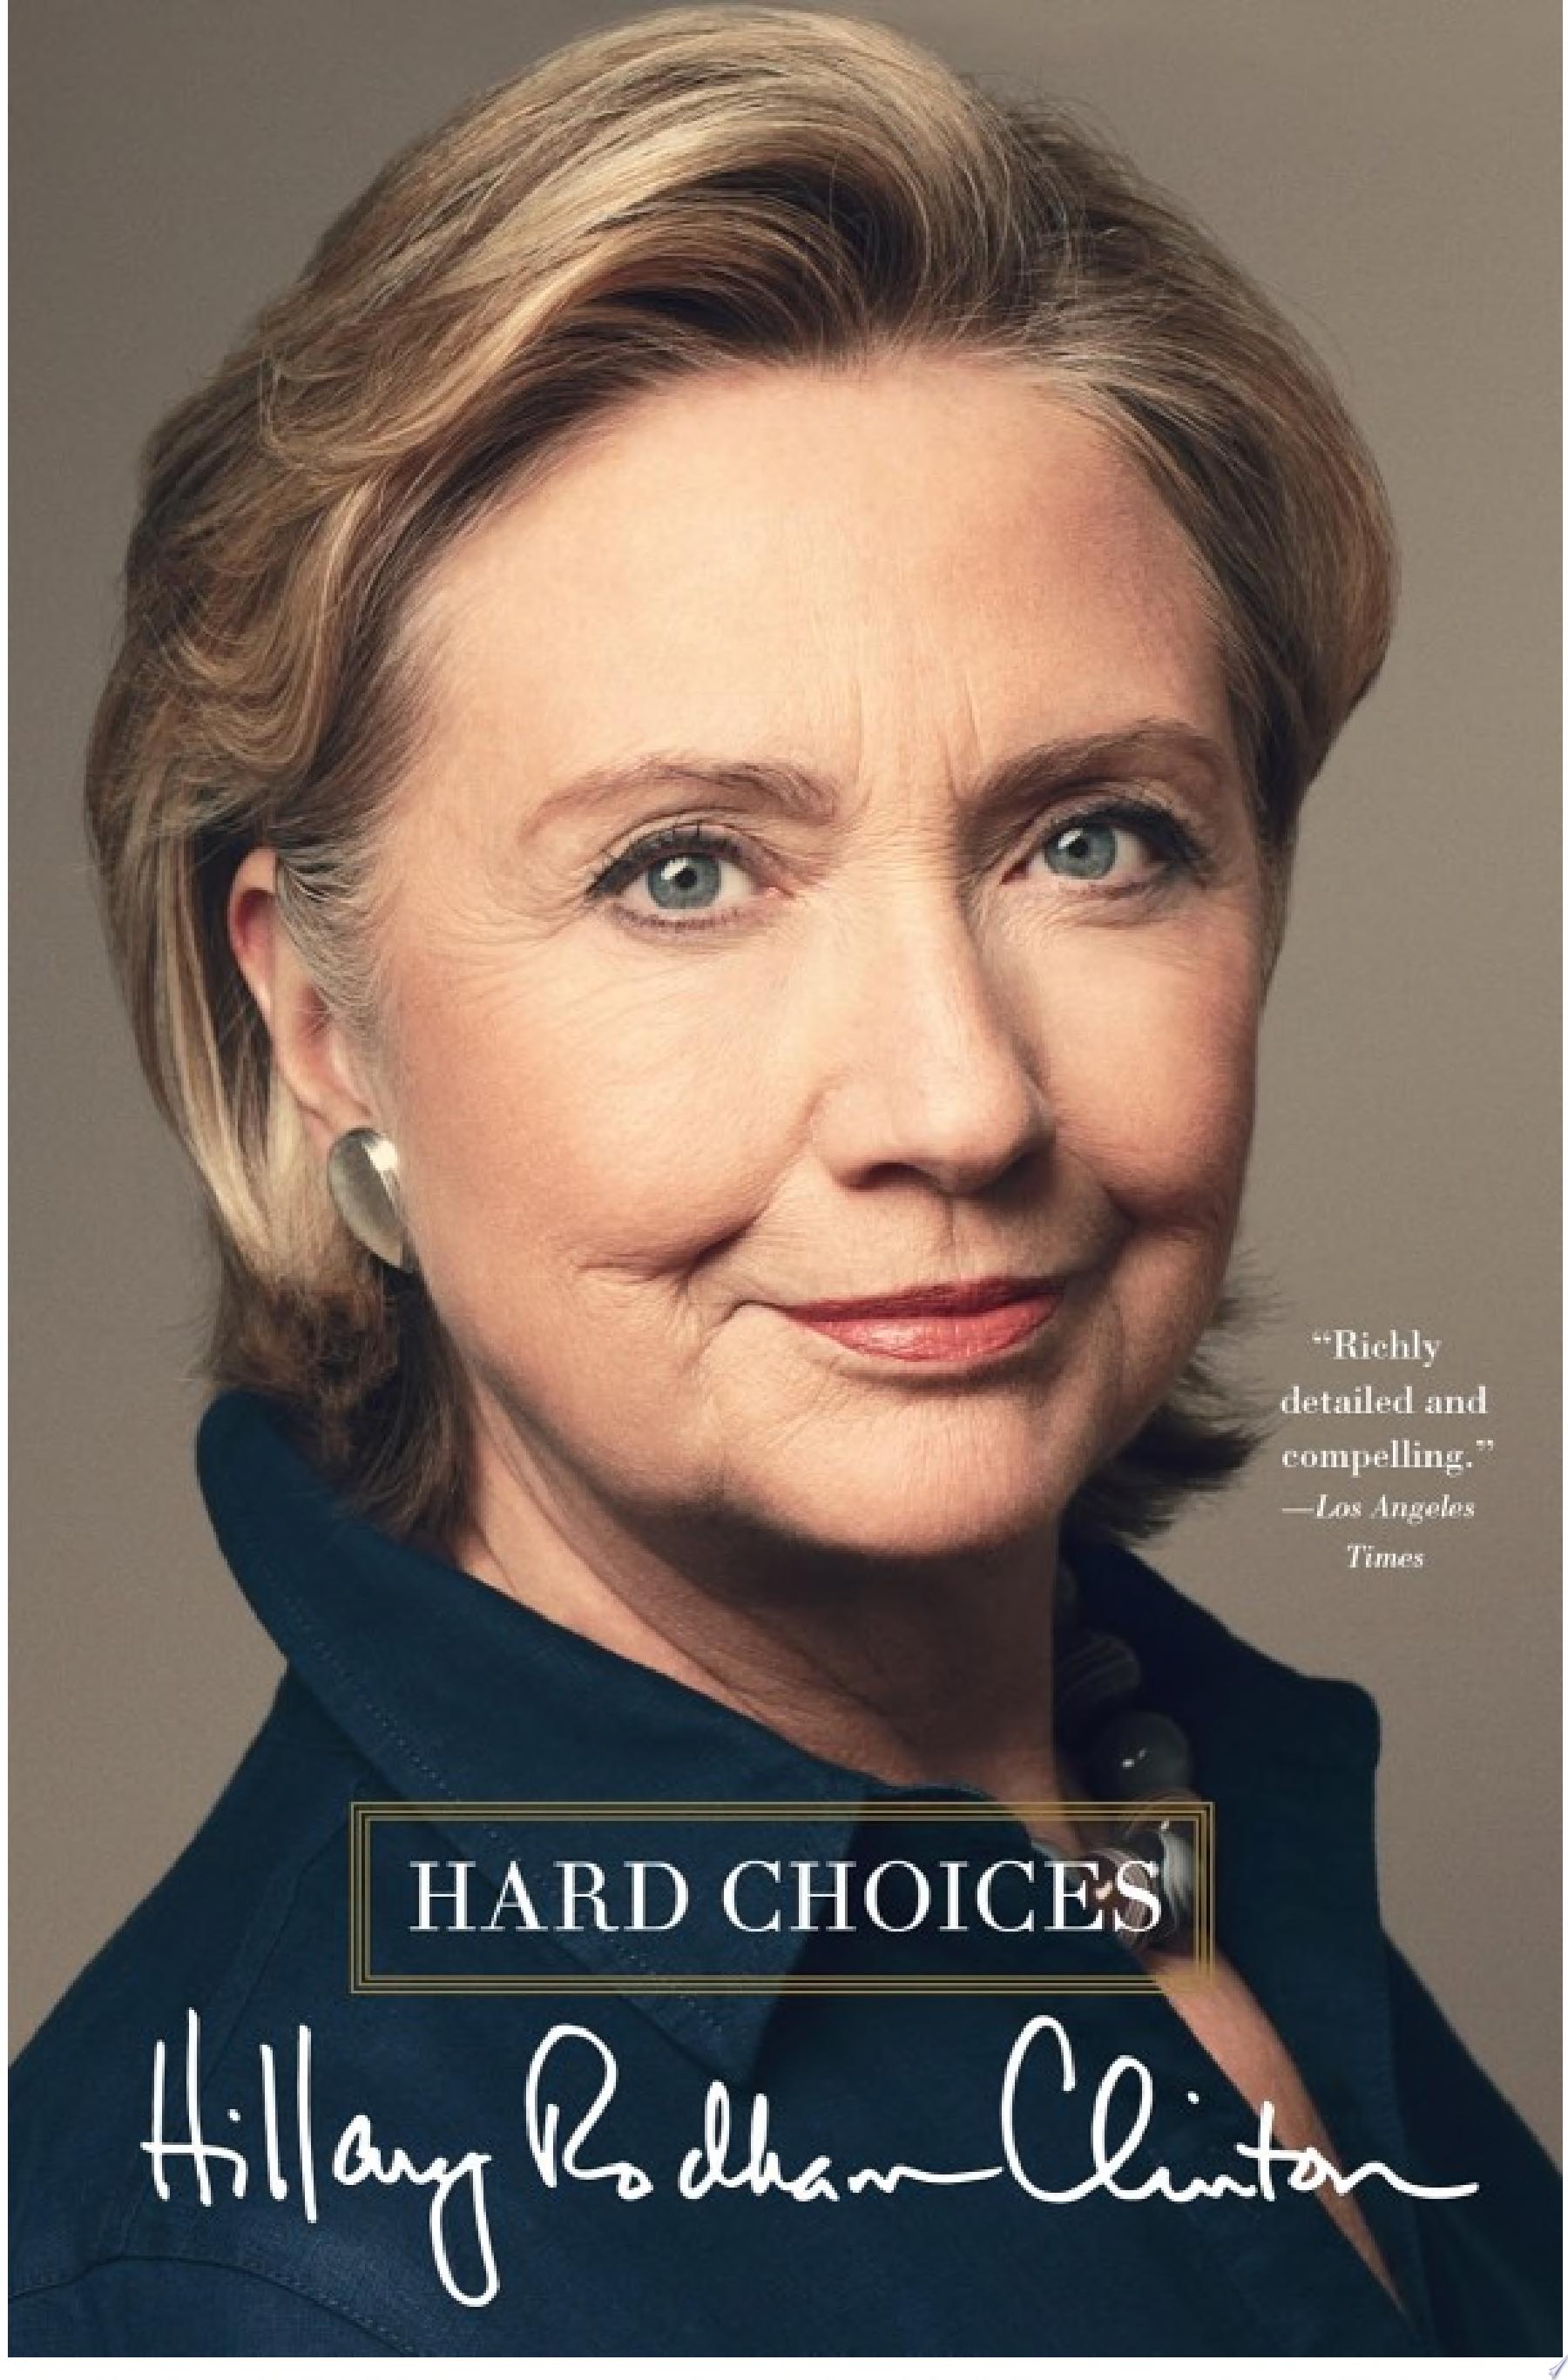 Image for "Hard Choices"